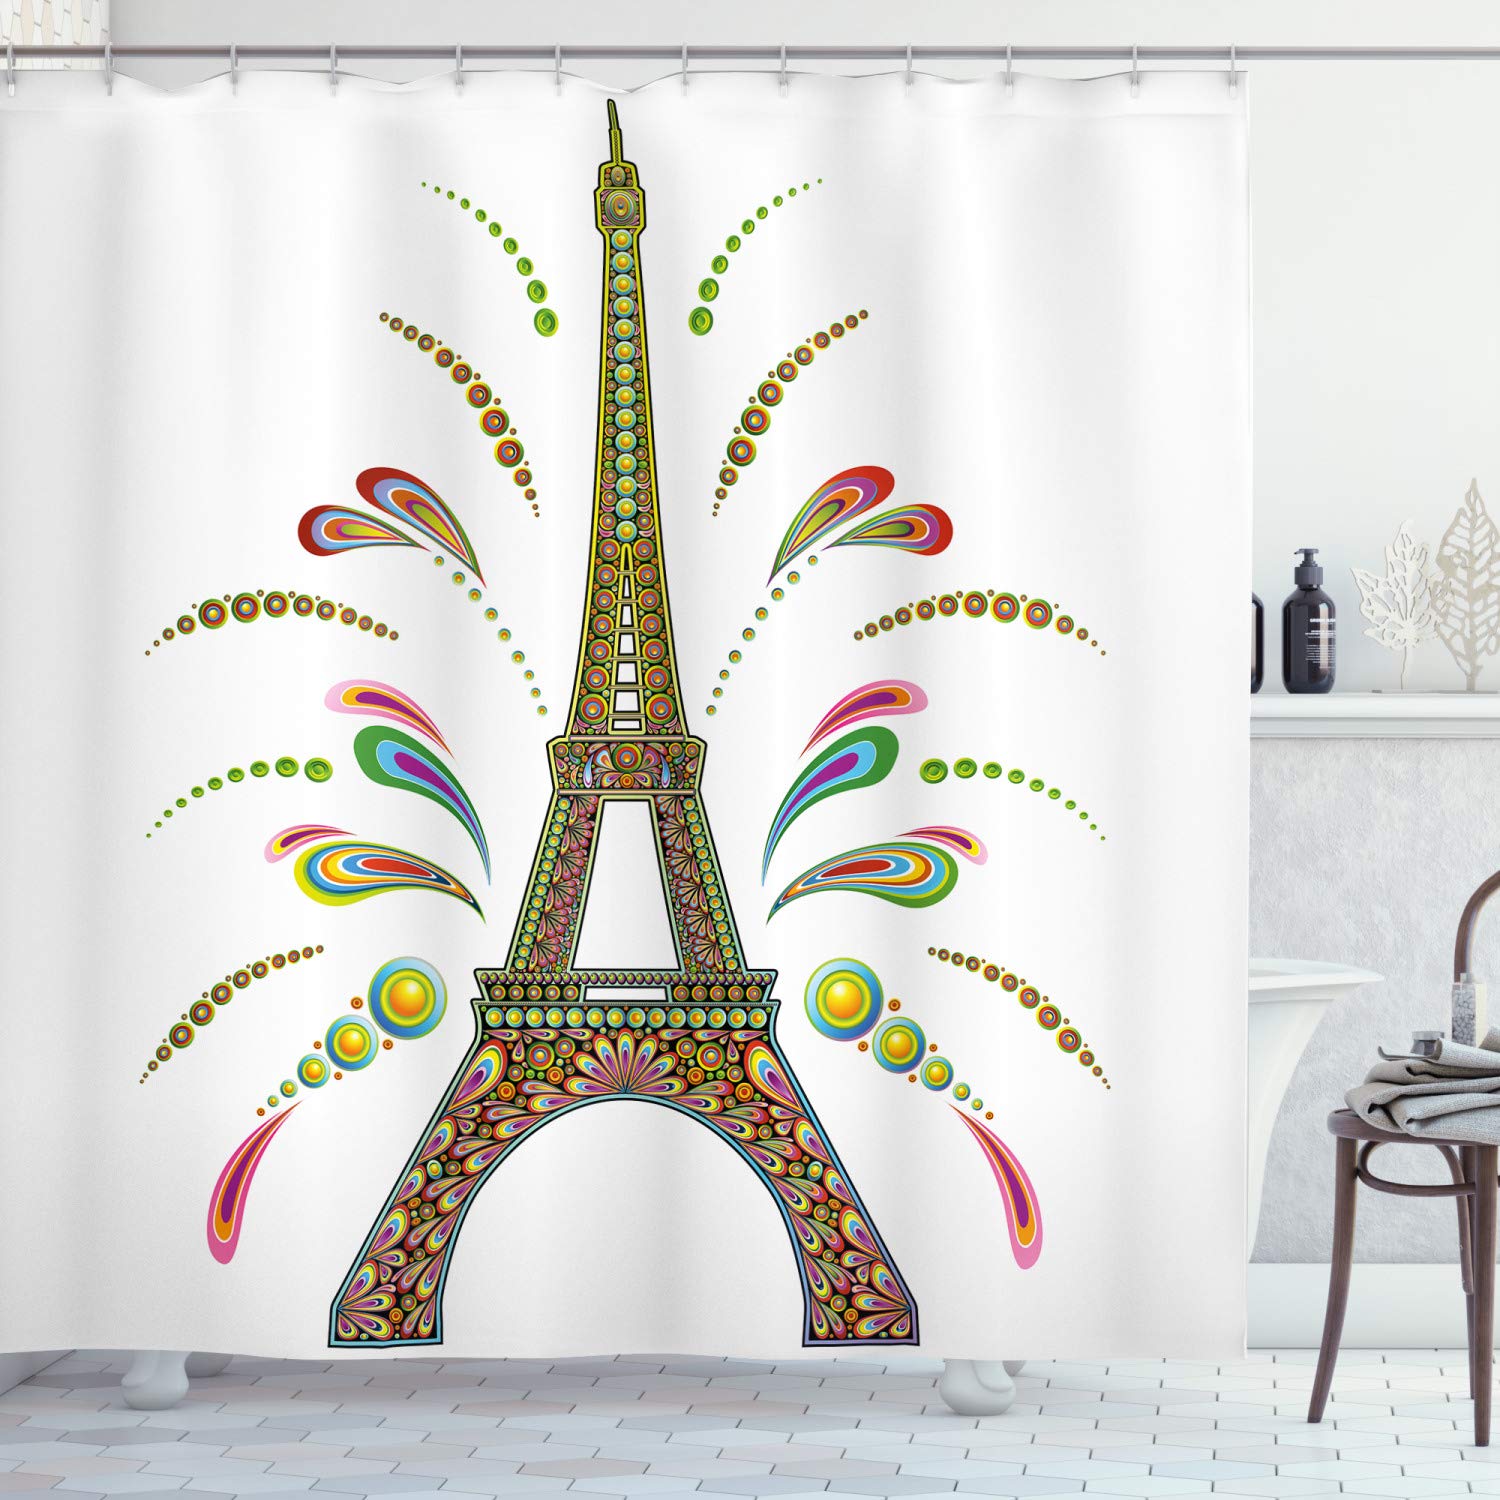 Ambesonne Psychedelic Shower Curtain, France Eiffel Tower Abstract Fireworks Design Rainbow Psychedelic Patterns Art, Cloth Fabric Bathroom Decor Set with Hooks, 70" Long, White Yellow